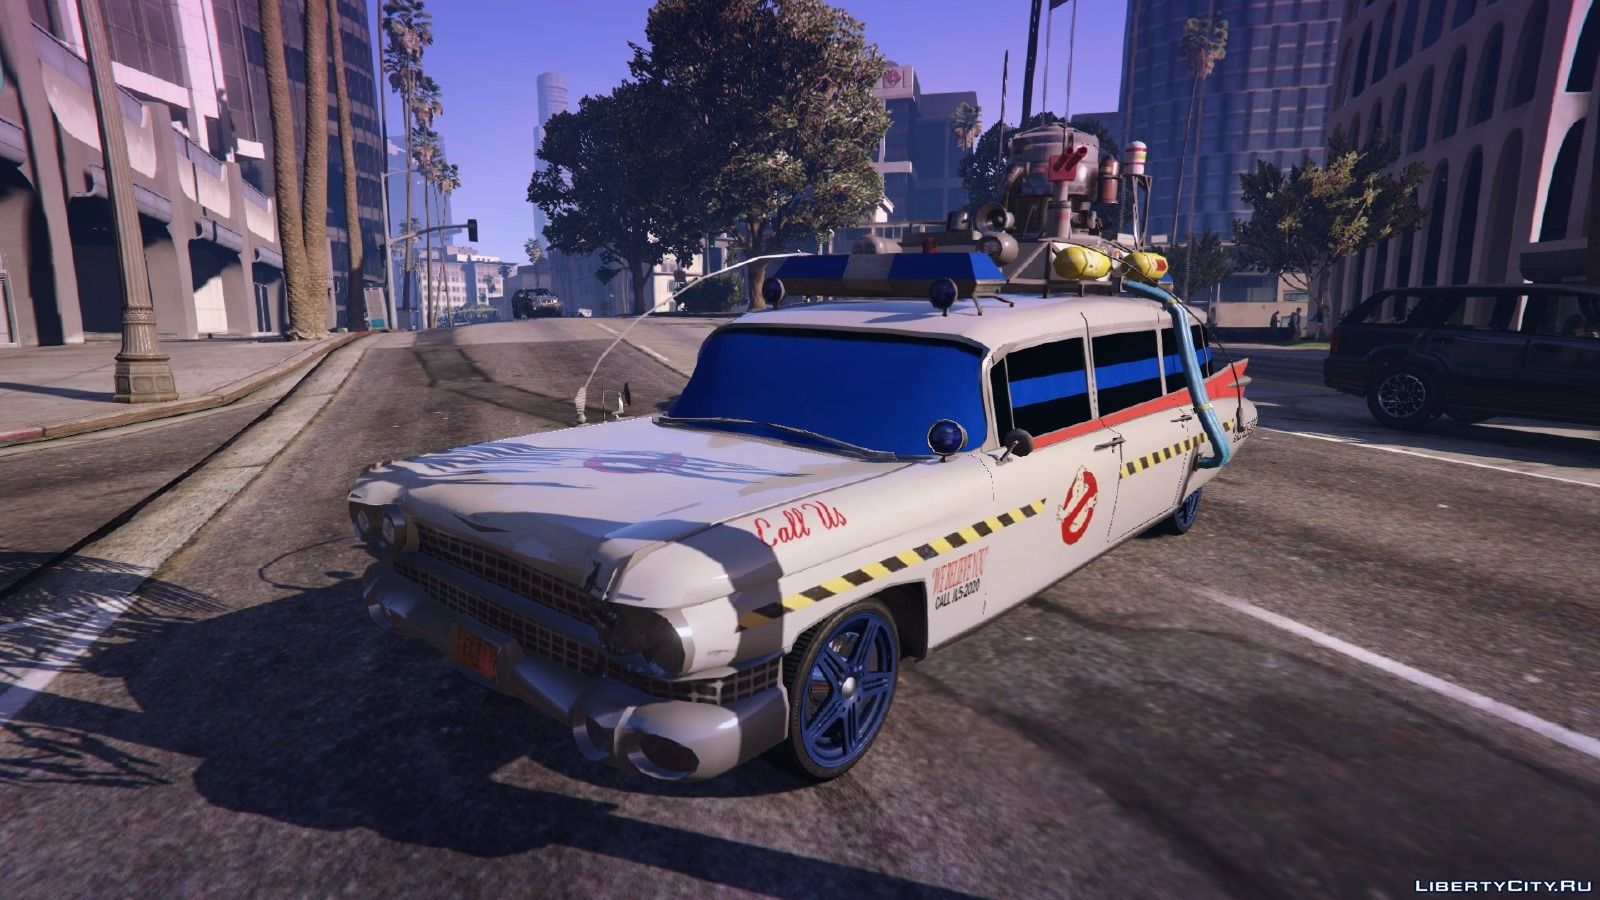 Cadillac Ecto-1 GHOSTBUSTERS ГТА 5 РП